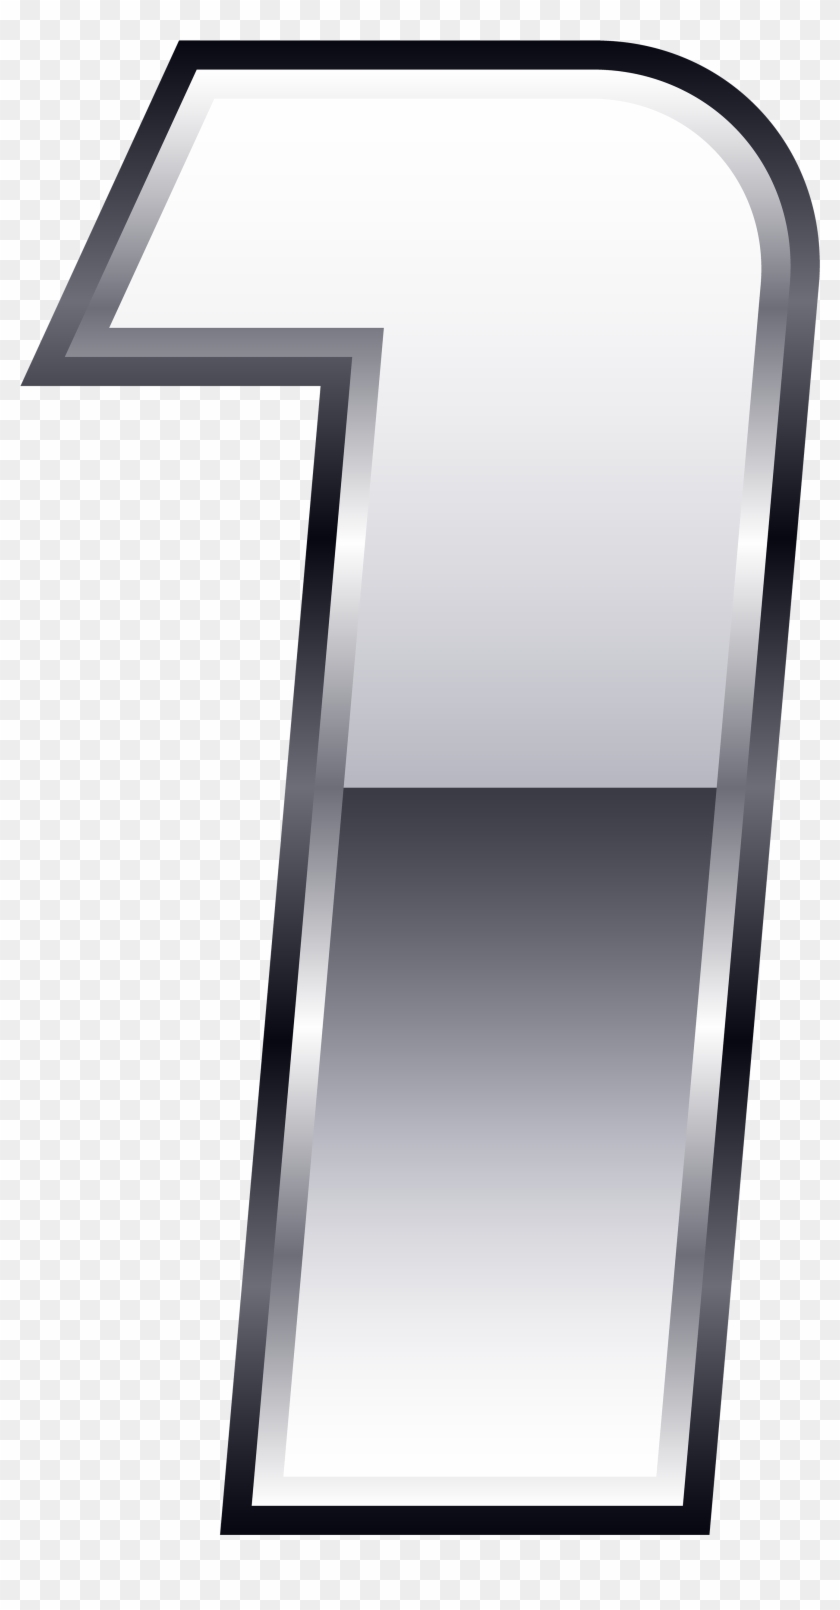 Silver One Png - Silver Number One Clipart Transparent Png #3748694